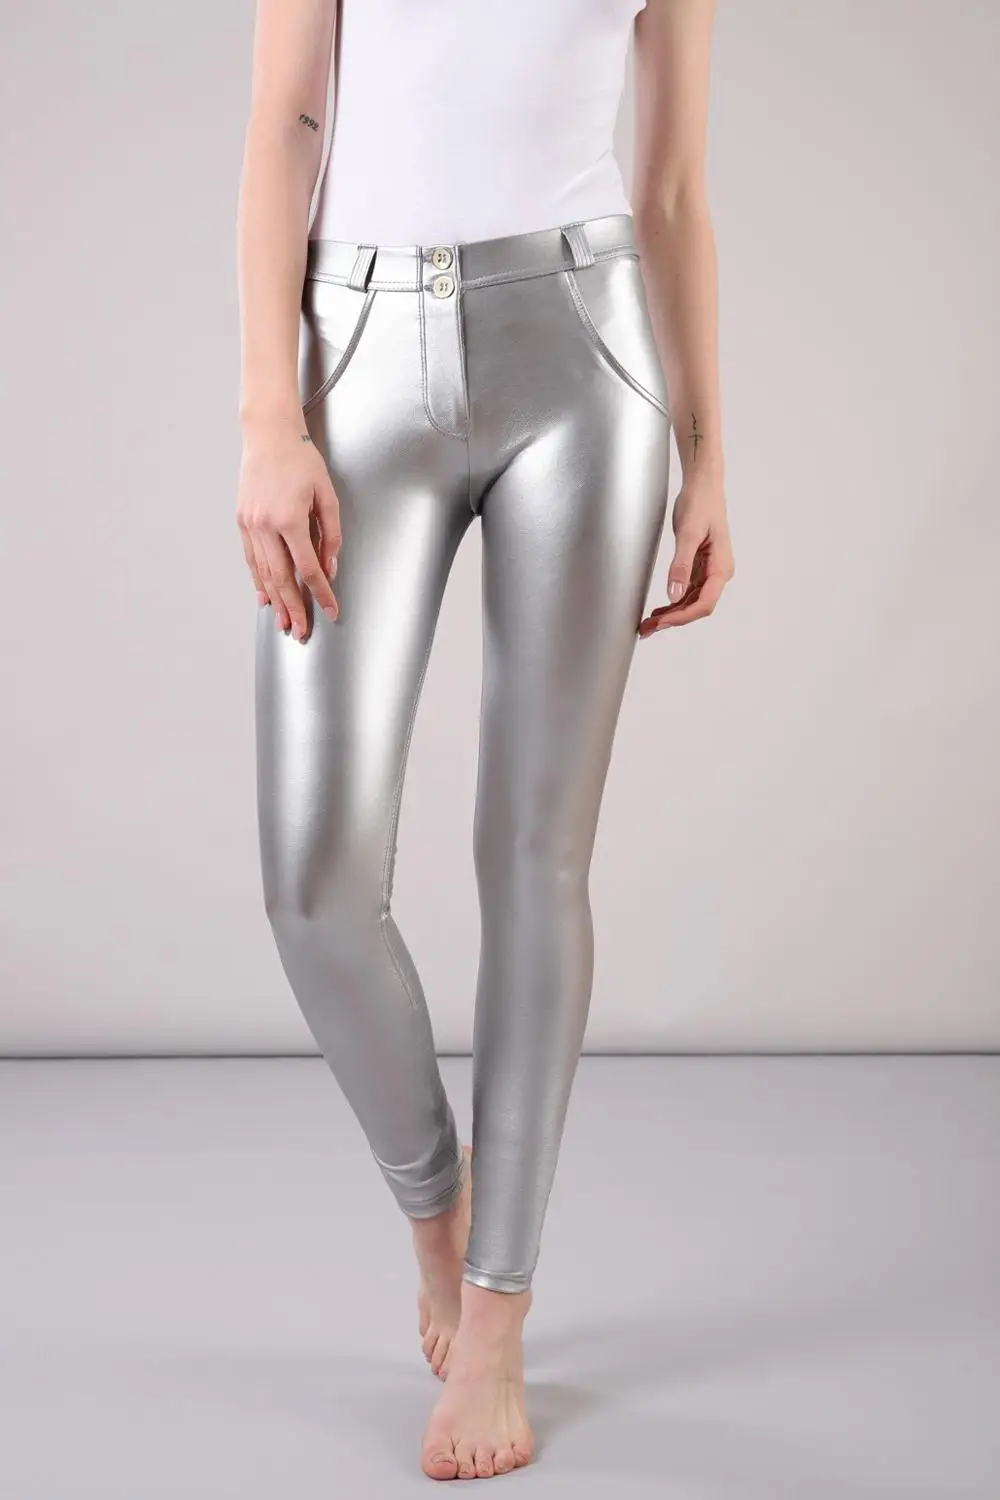 Melody Four Ways Stretchable Silver Faux Leather Pants Women Mid Rise Button Fly Push Up PU Leather Trousers Plus Size Pants